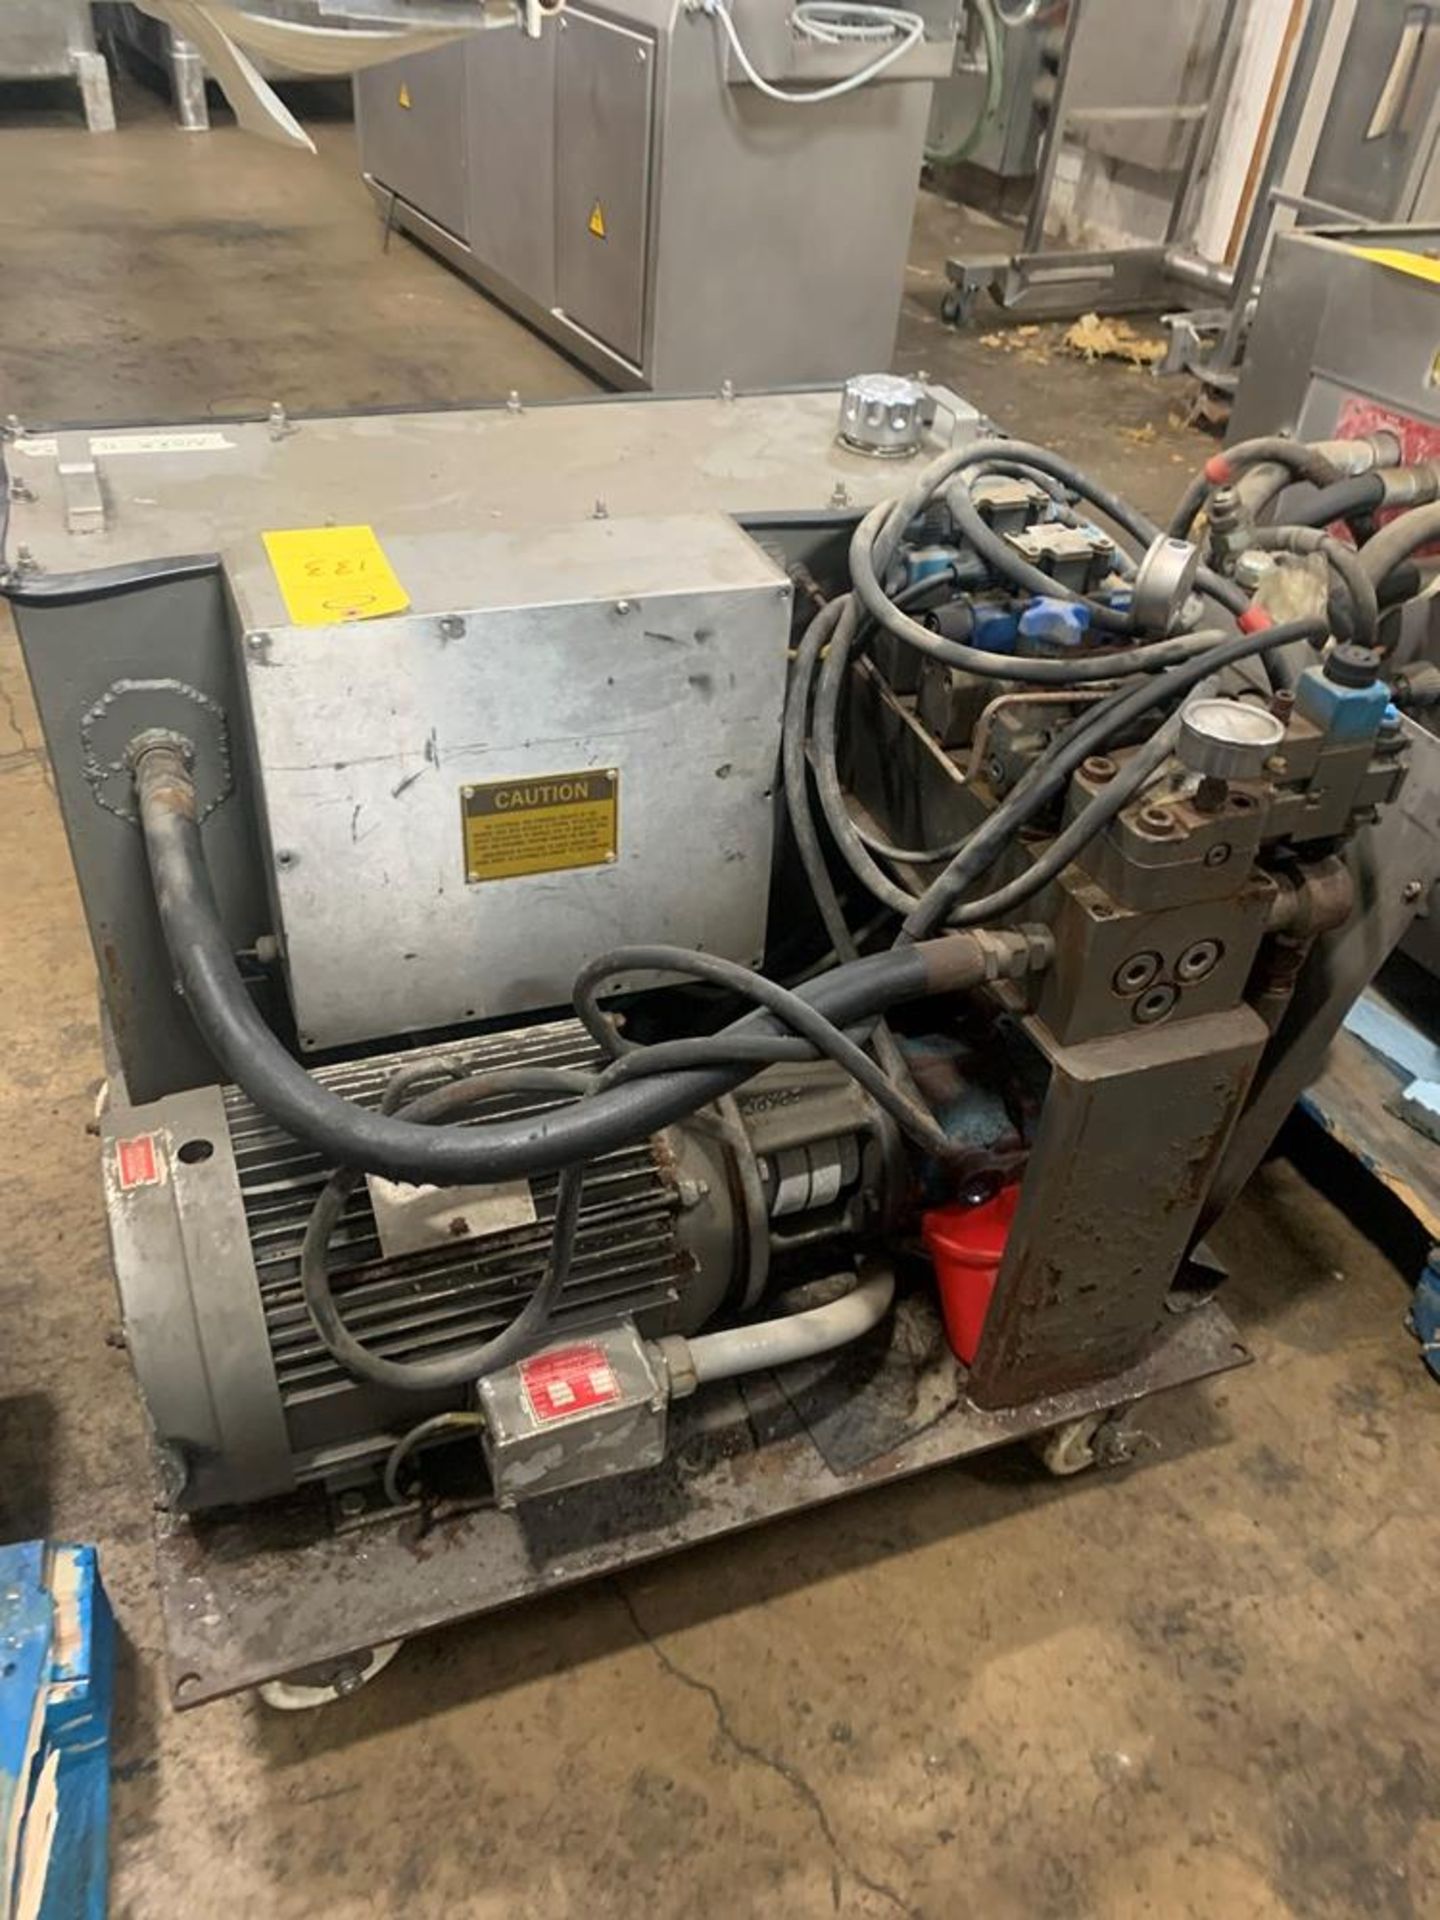 Bettcher Mdl. 75 Press with power pack for parts (Located in Plano, IL) - Image 11 of 11